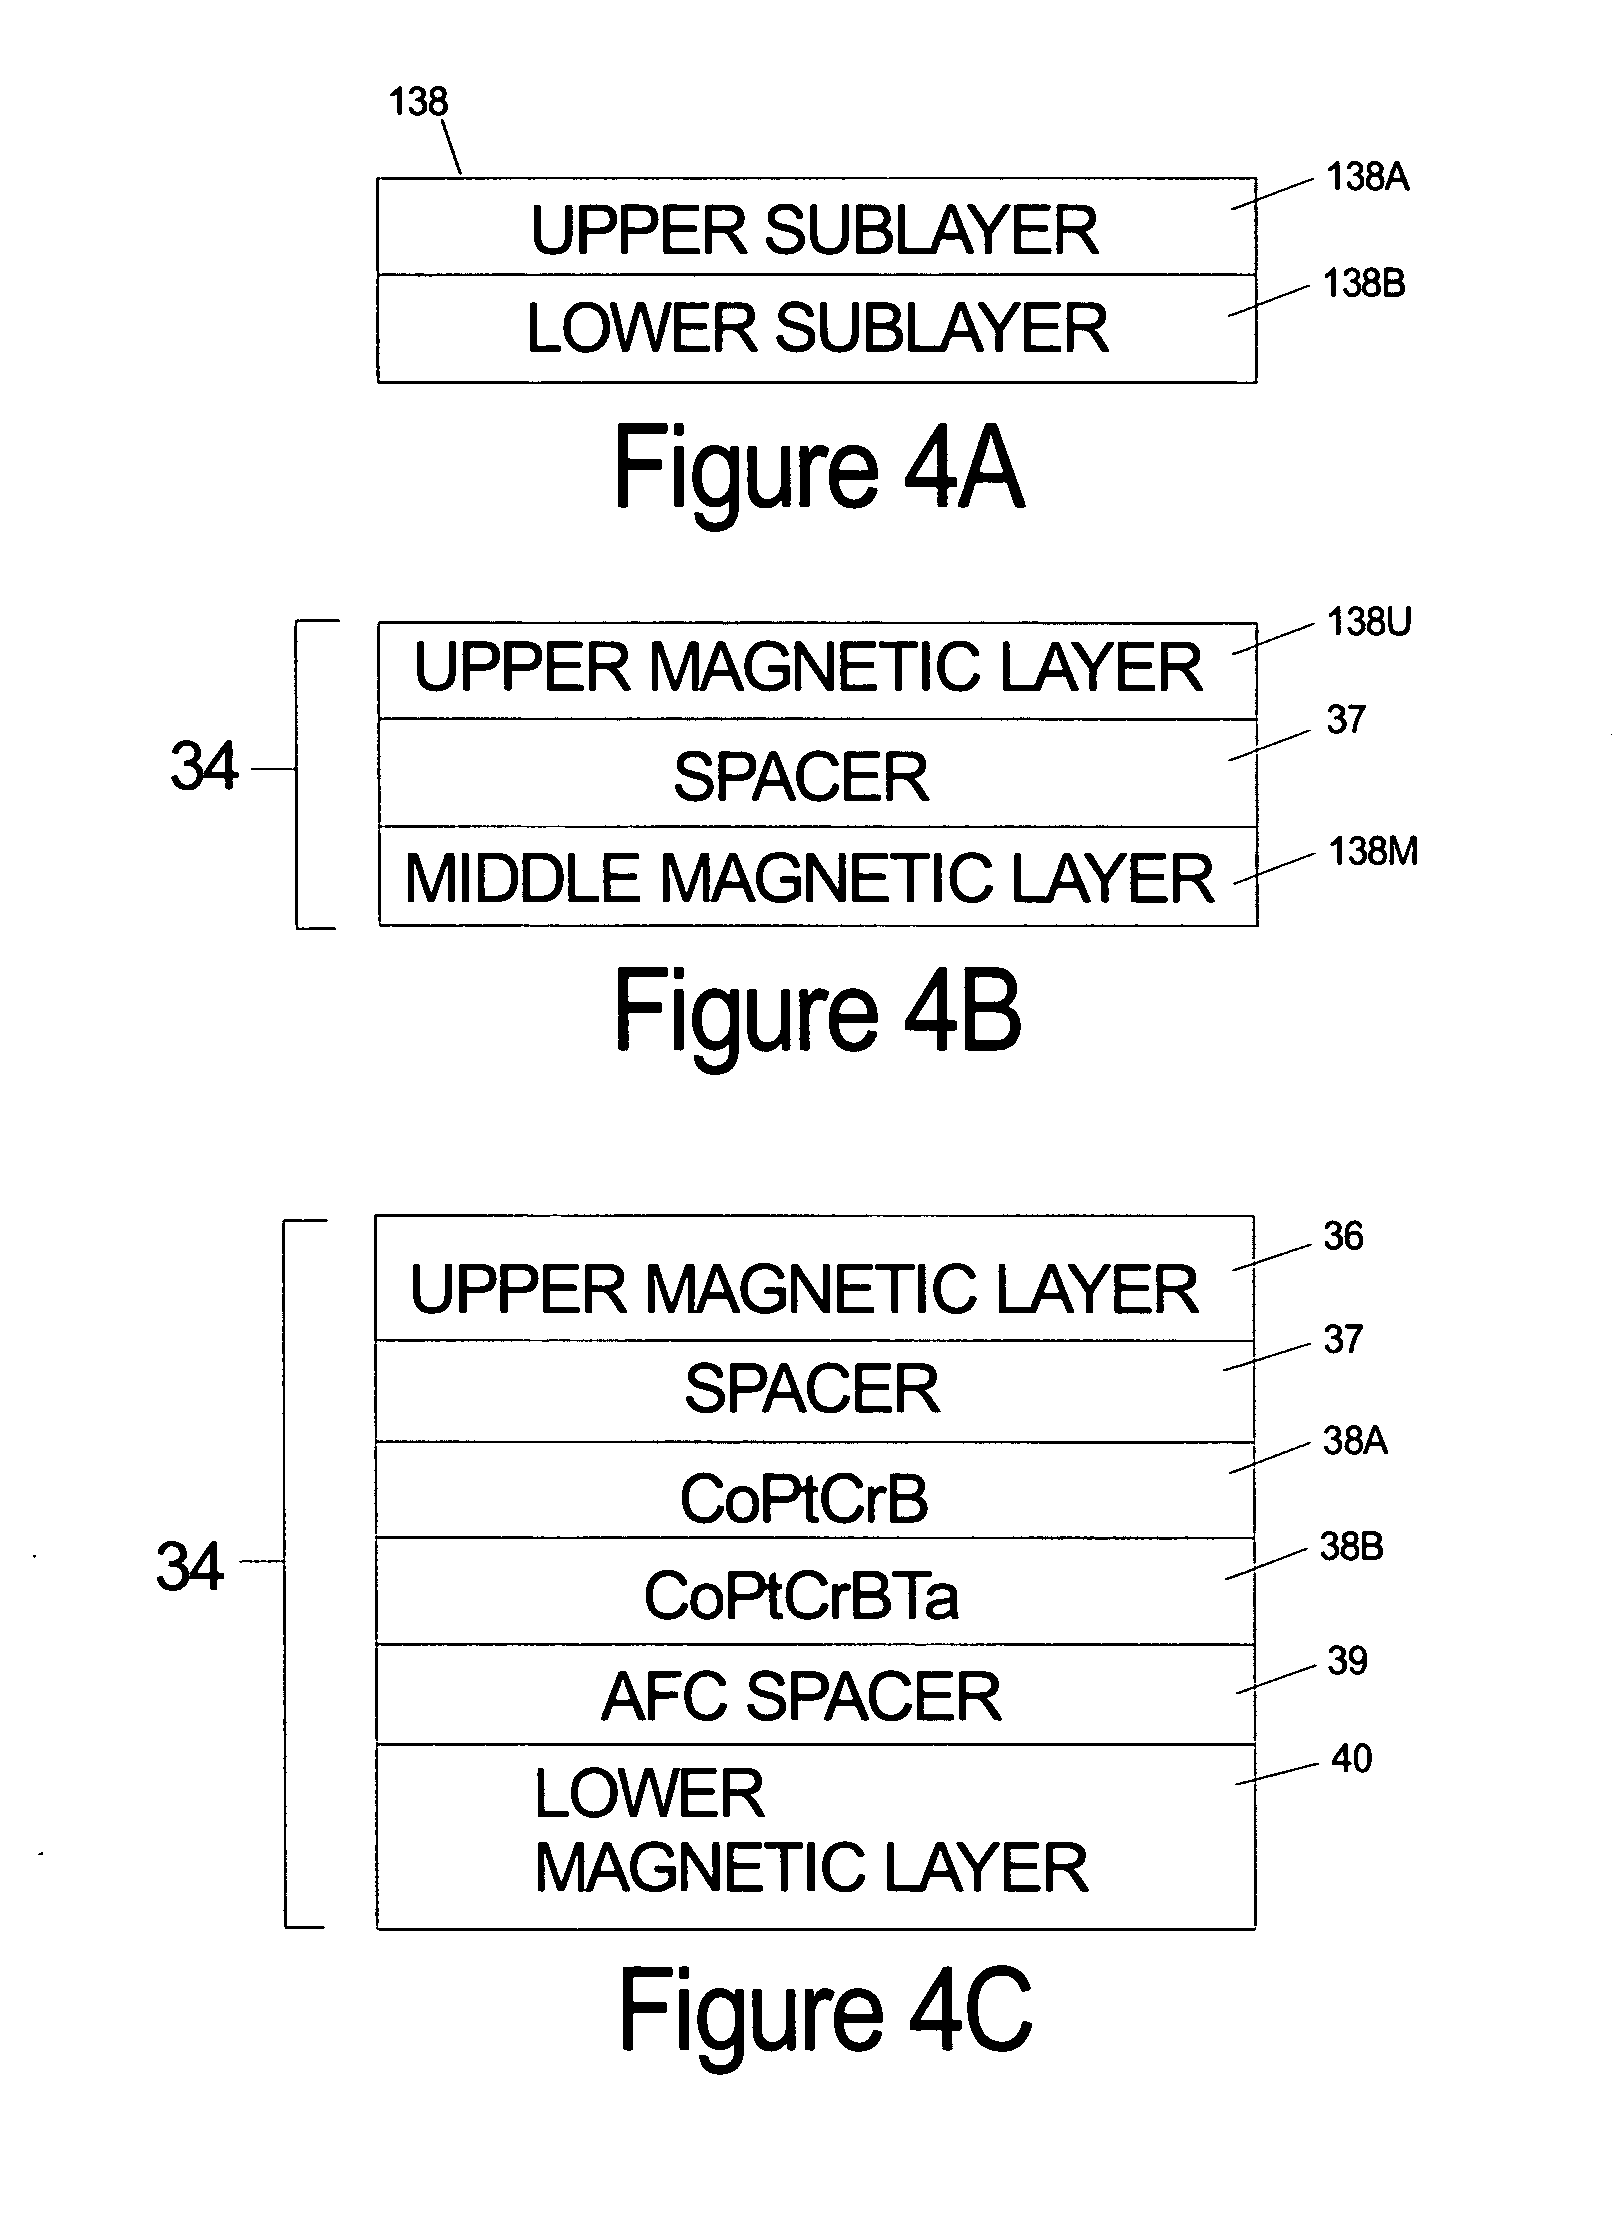 Laminated magnetic thin films with sublayers for magnetic recording